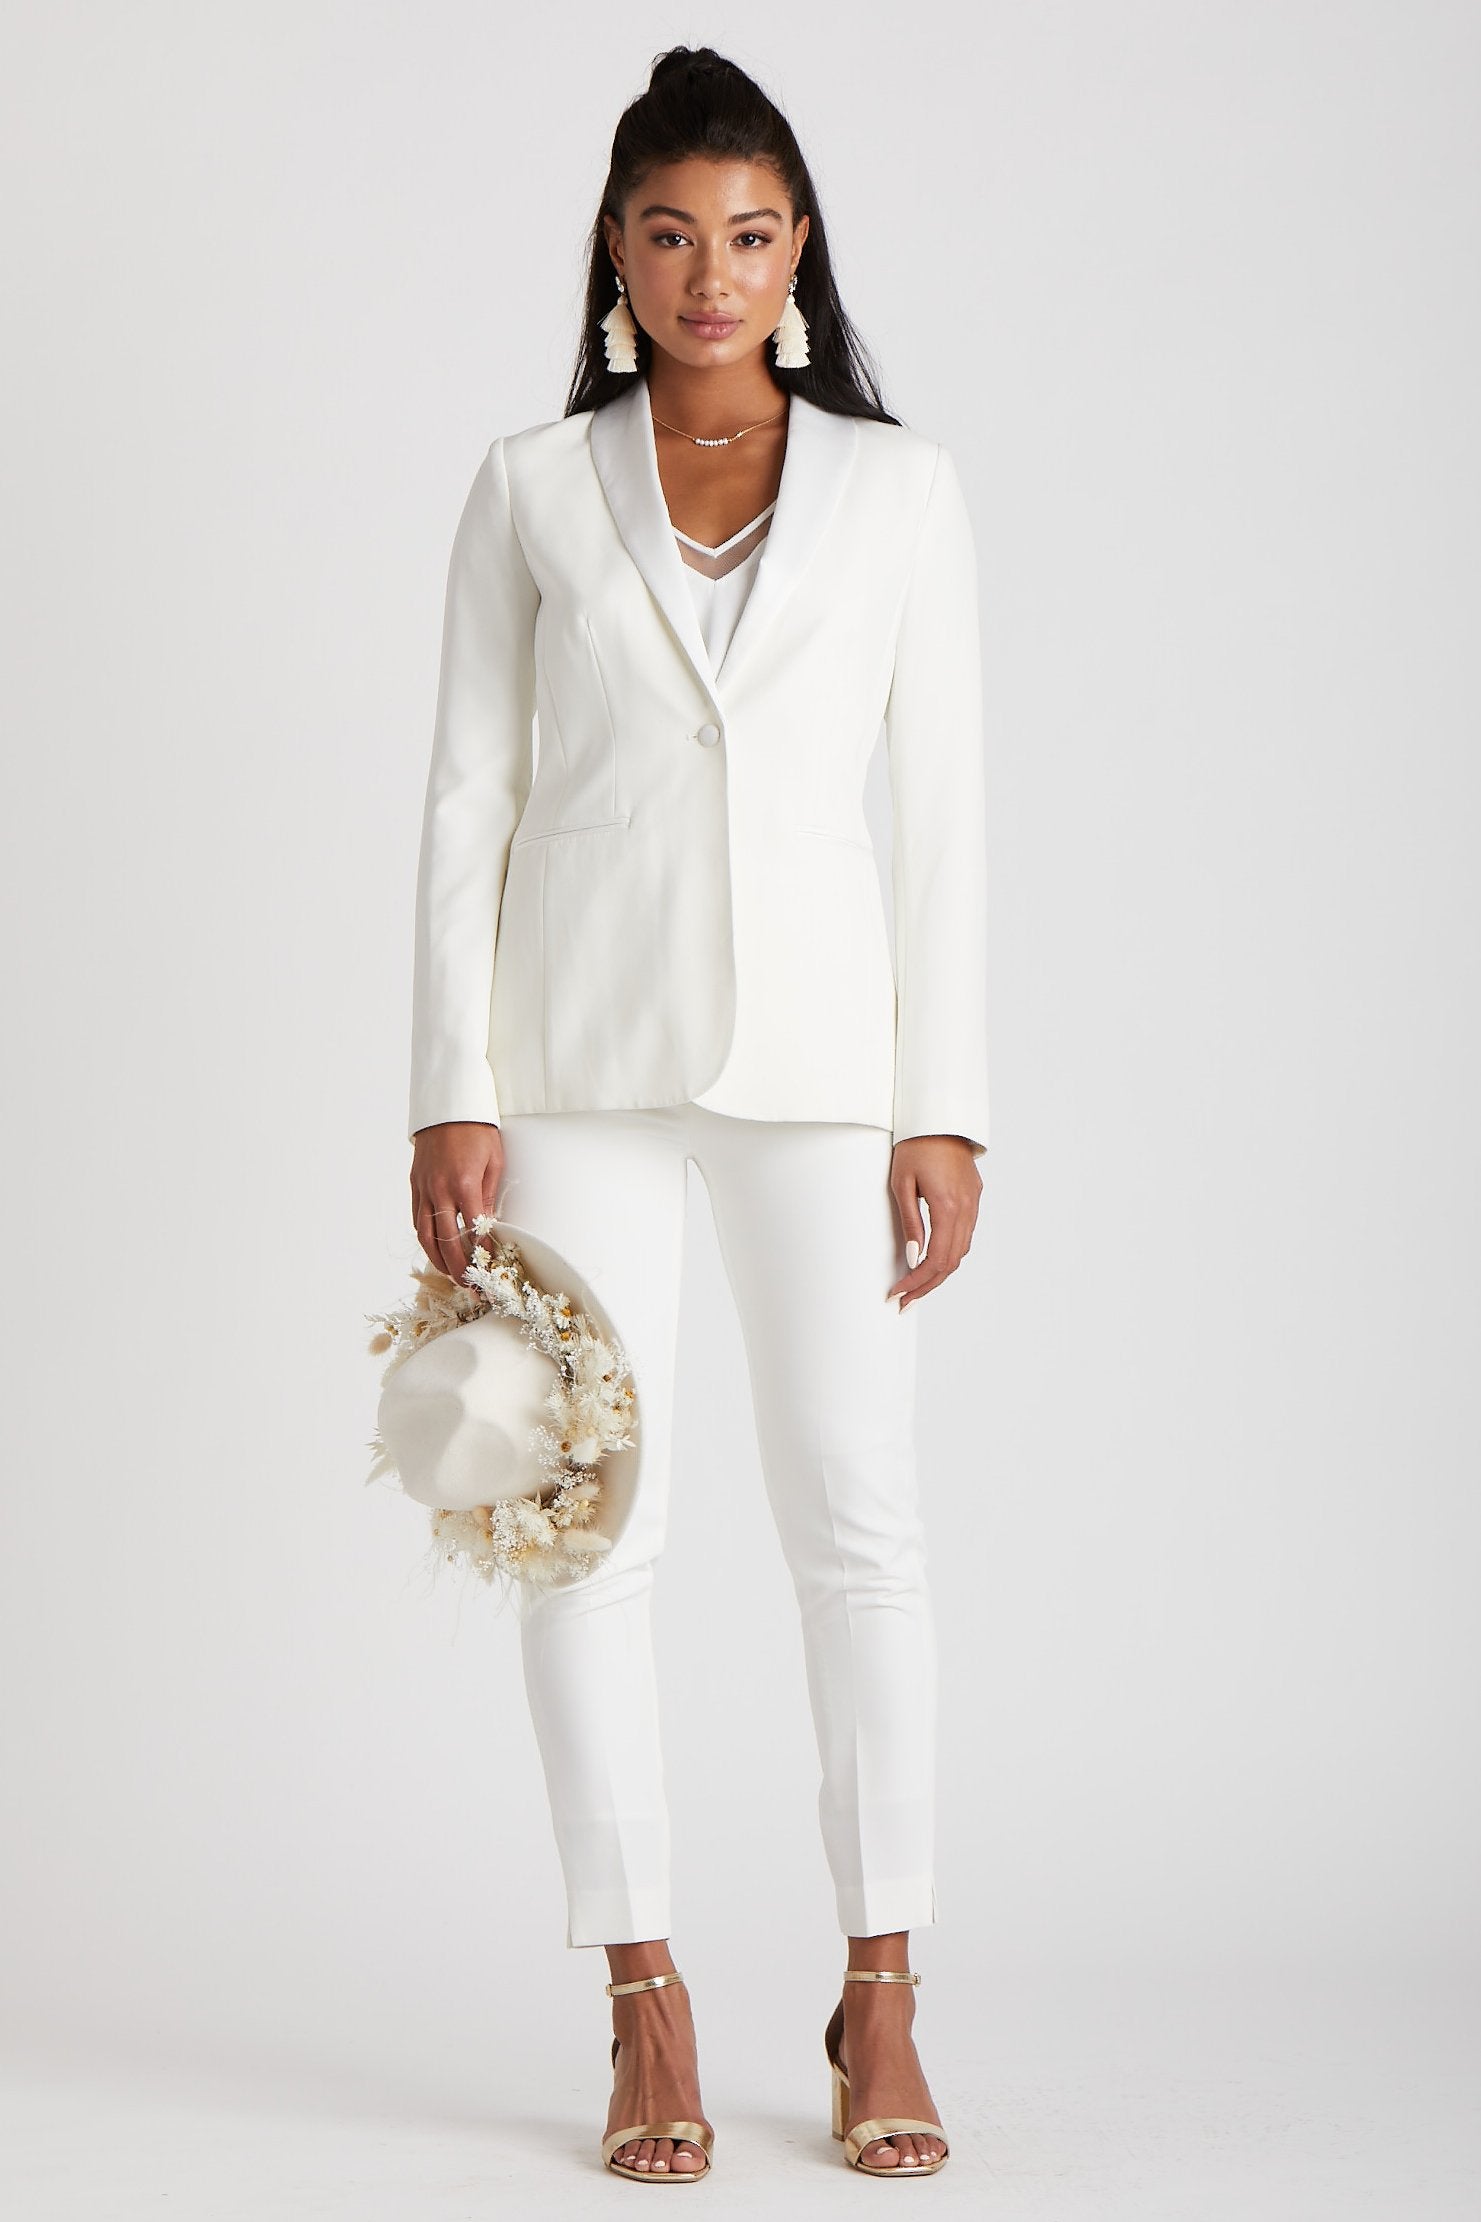 Women's White Tuxedo by SuitShop, front view